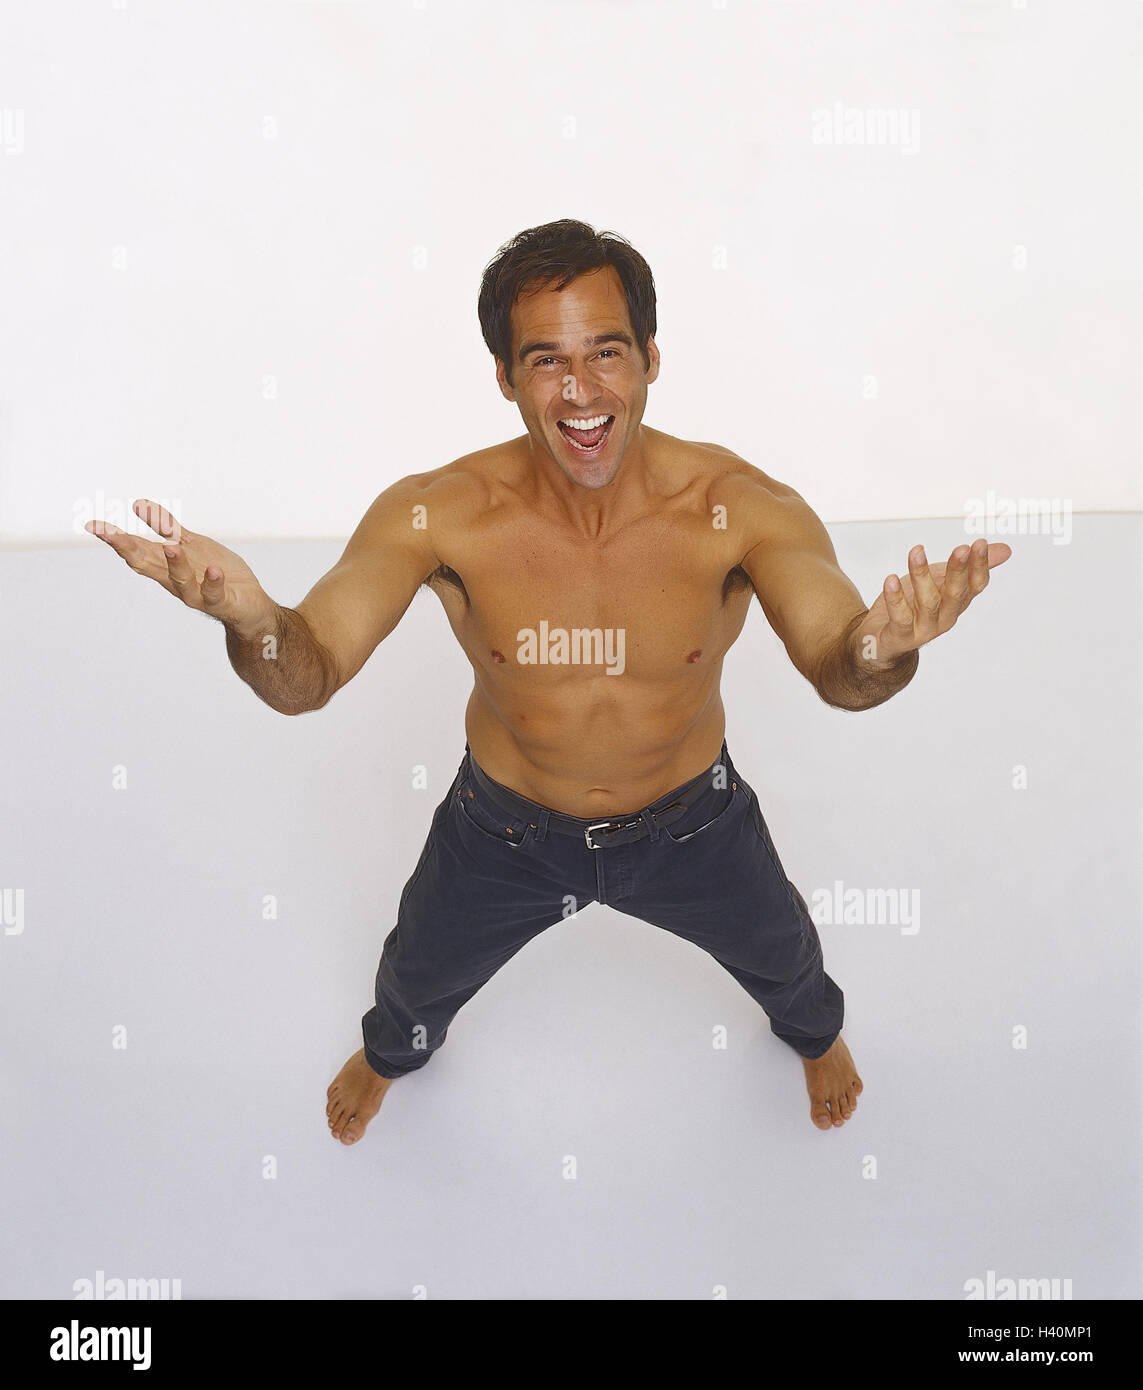 Man, young, free upper part of the Body, gesture, Men laugh, barefoot, happy, funnily, melted, joy life, fun, enthusiasm, body language, studio, cut out, from above, Stock Photo